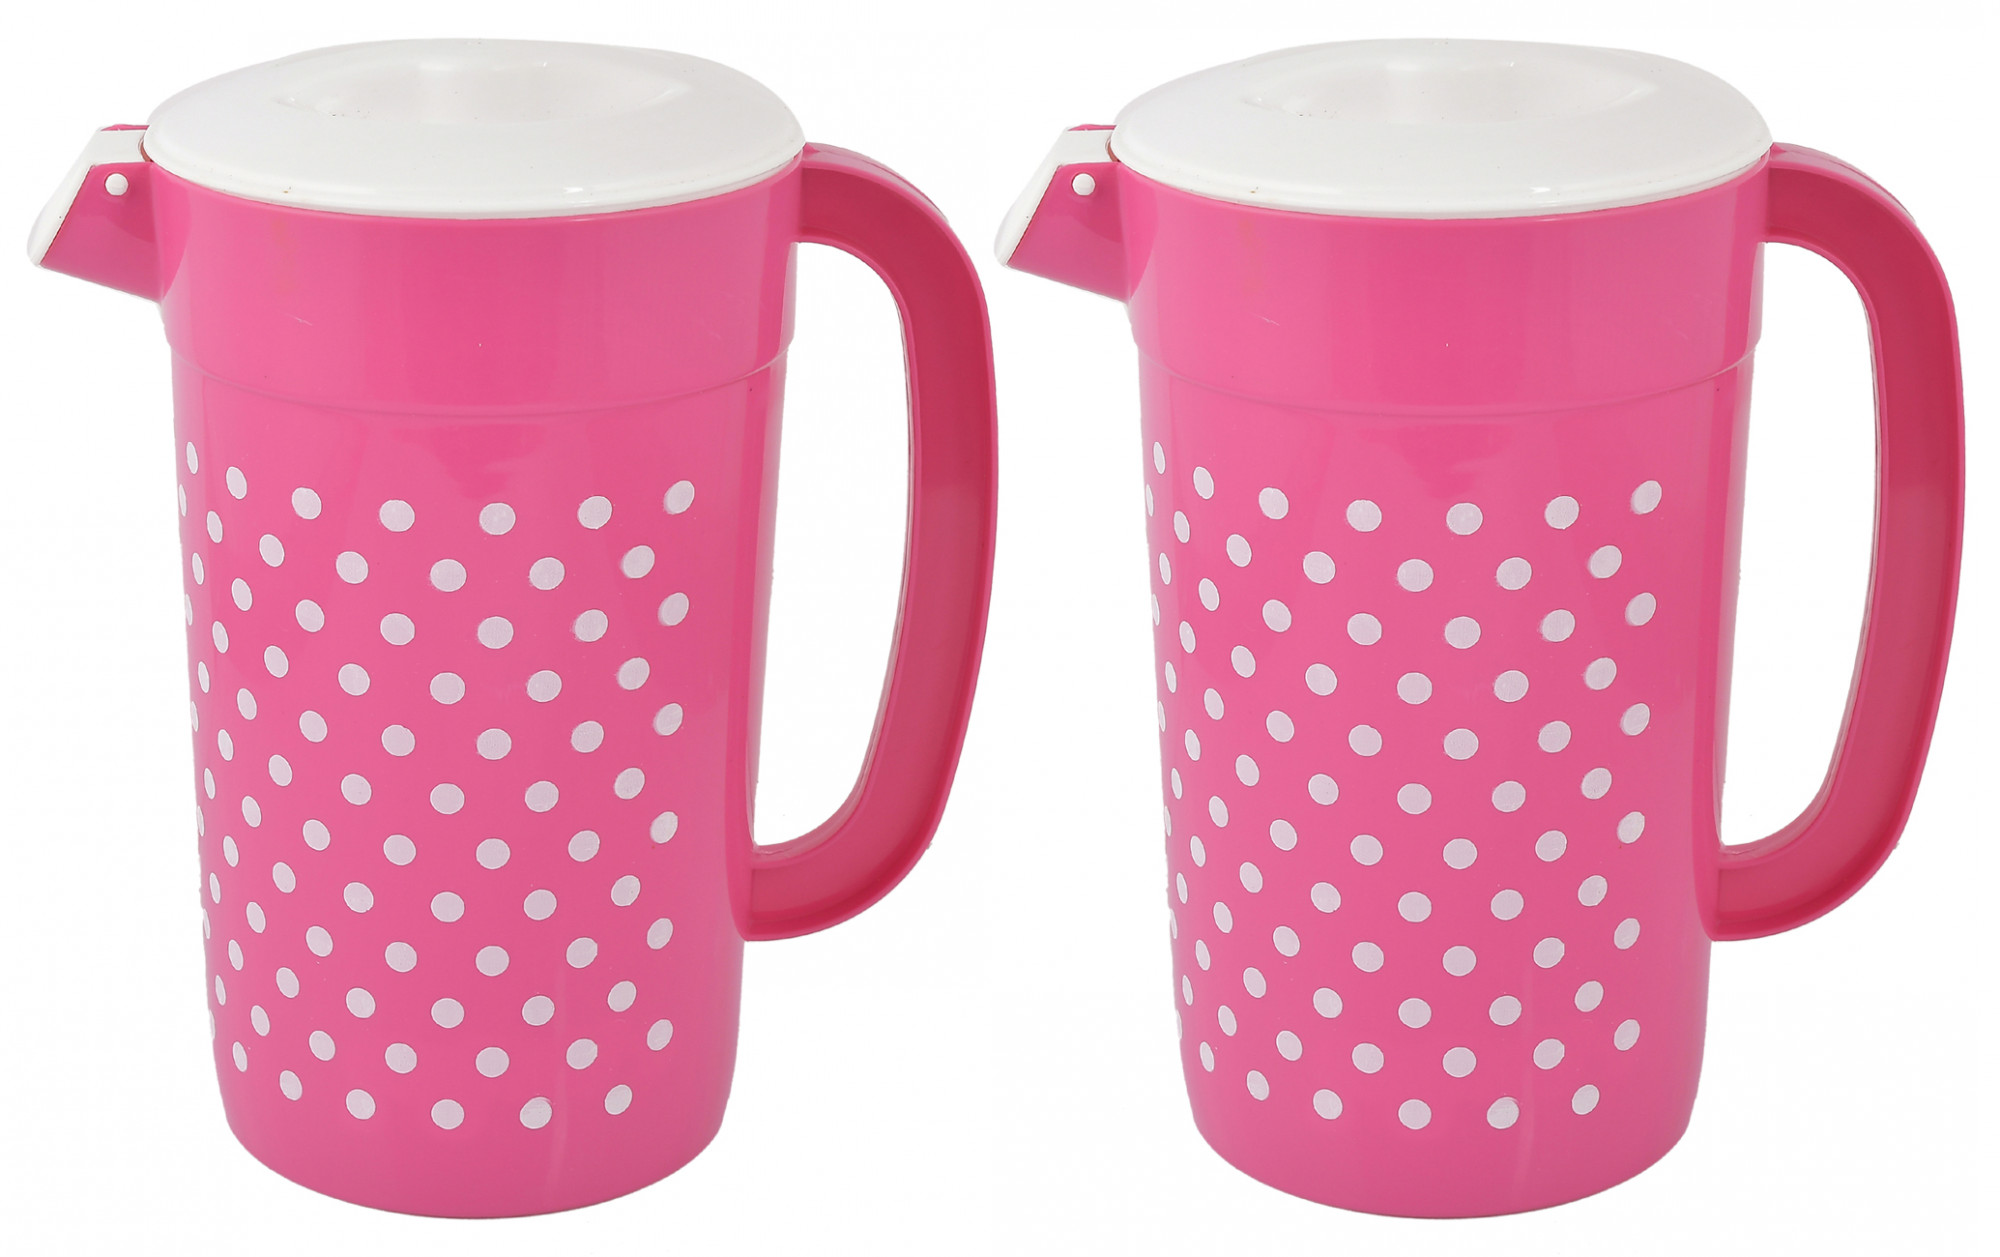 Kuber Industries Dot Printed Unbreakable Multipurpose Plastic Water Jug/Pitcher With Lid, 2.4 Ltr. (Pink)-HS42KUBMART25205